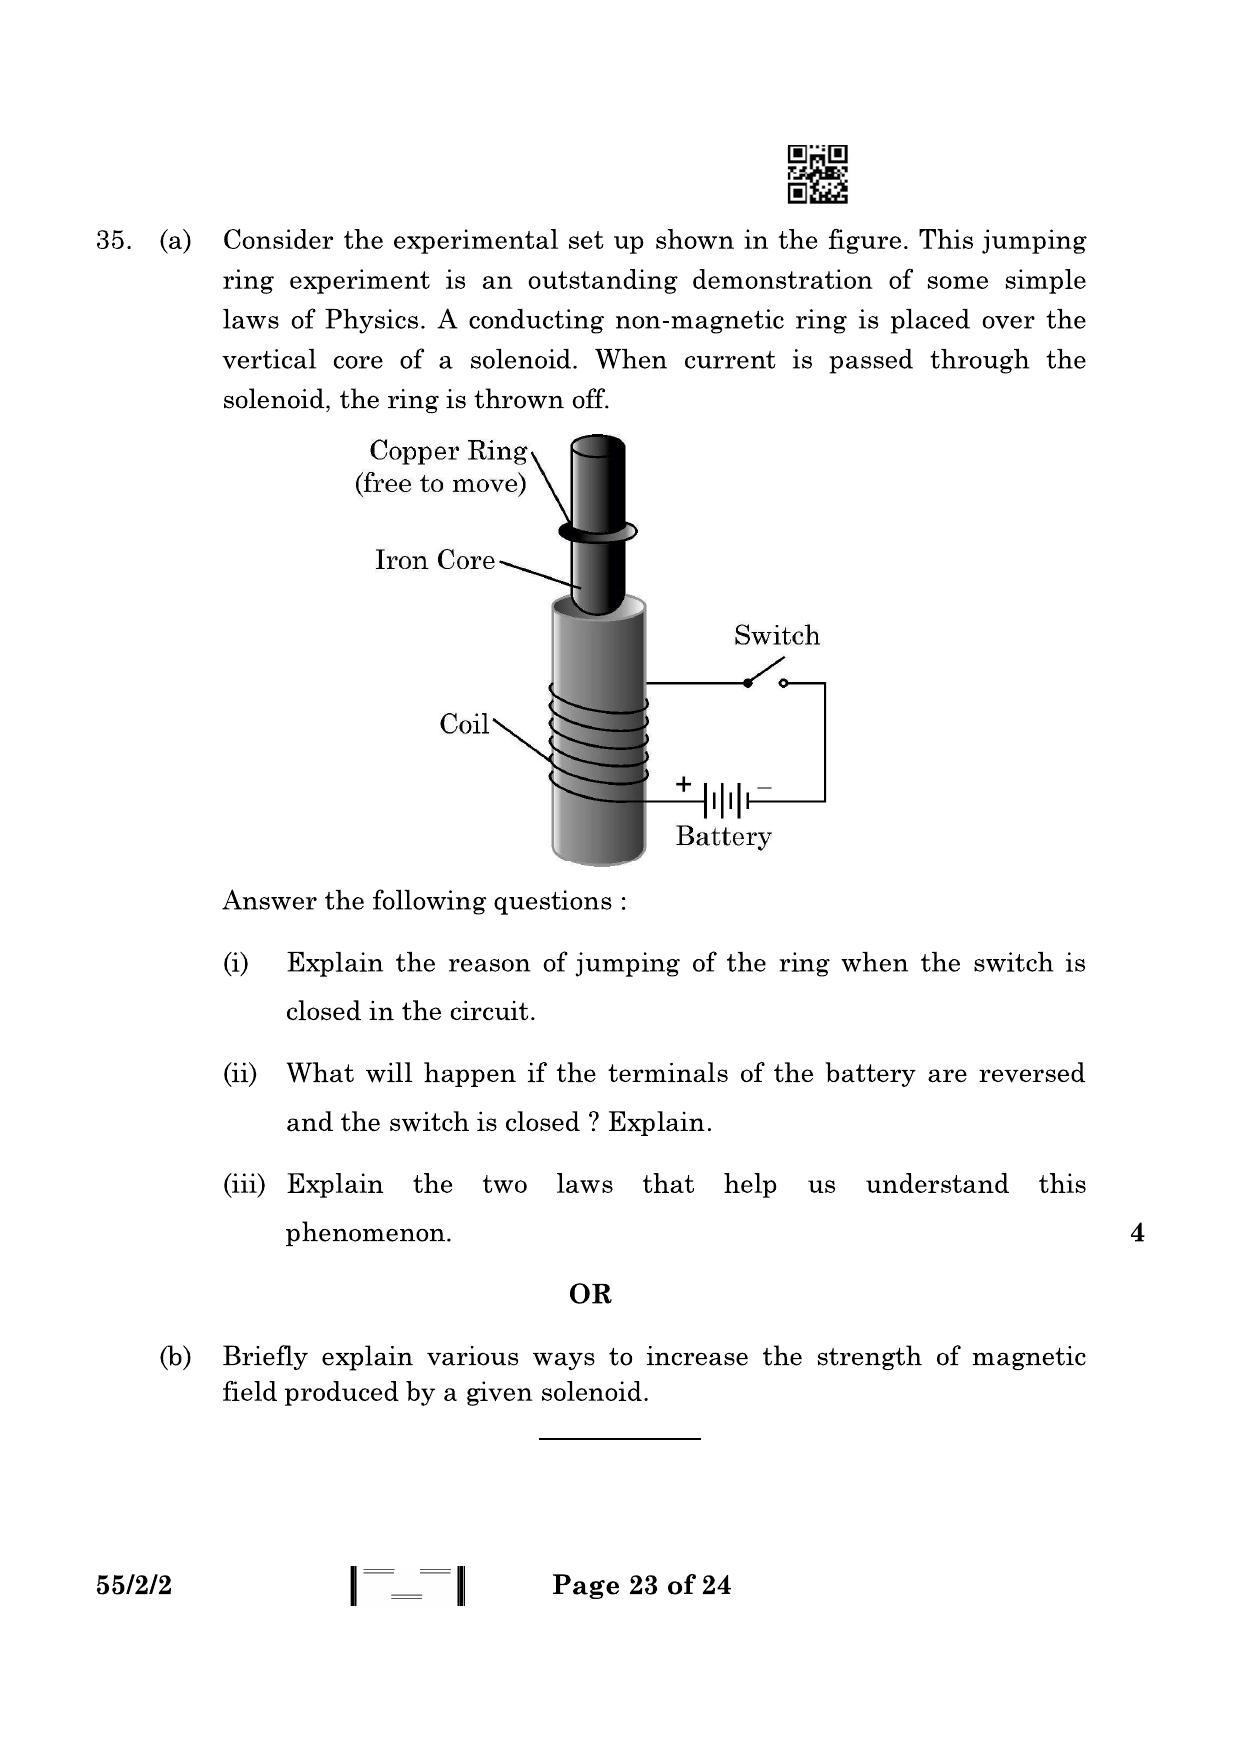 CBSE Class 12 55-2-2 Physics 2023 Question Paper - Page 23